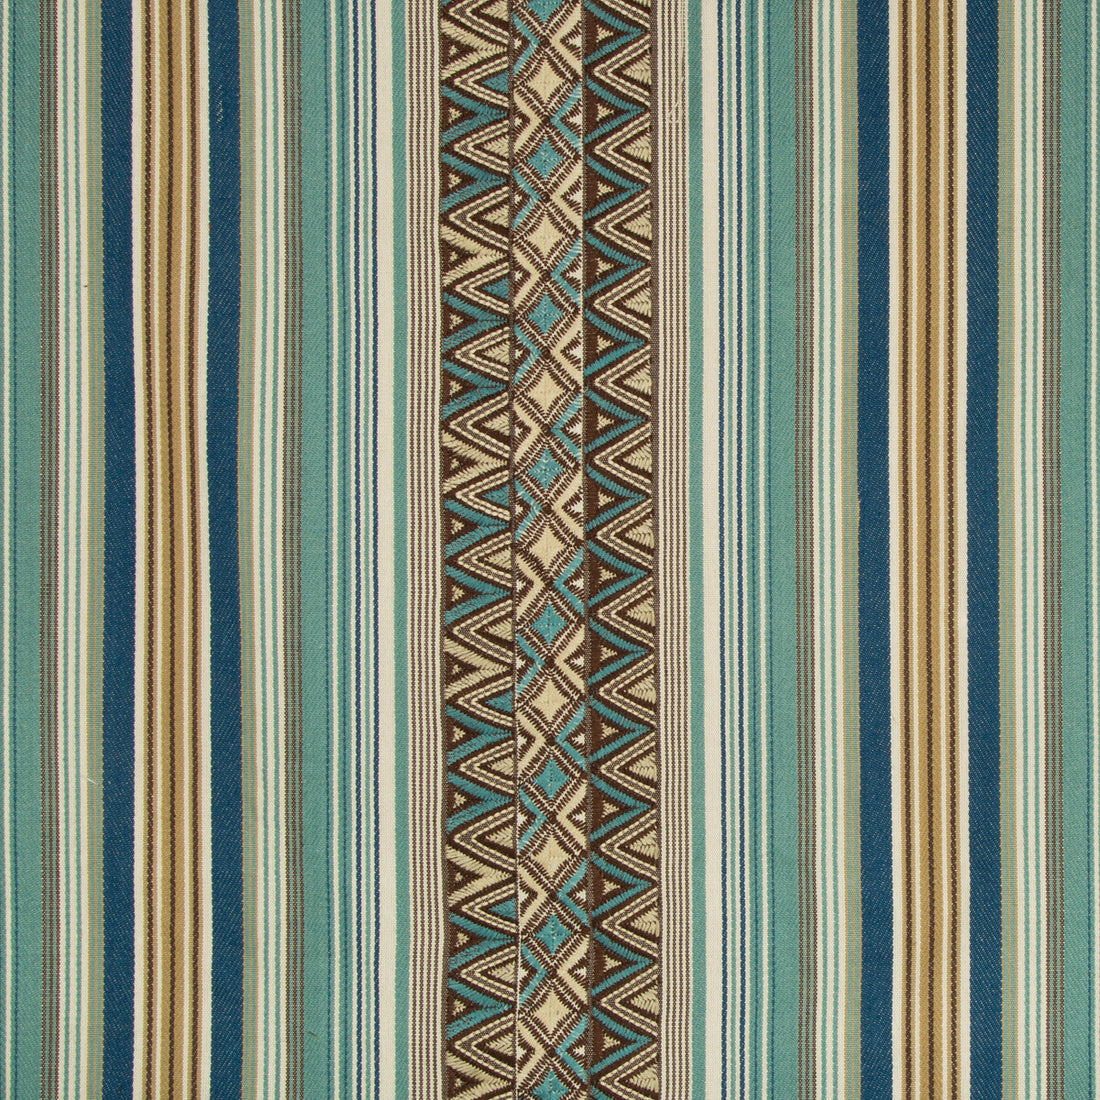 Dallol Stripe fabric in teal/brown color - pattern 2017151.536.0 - by Lee Jofa in the Merkato collection